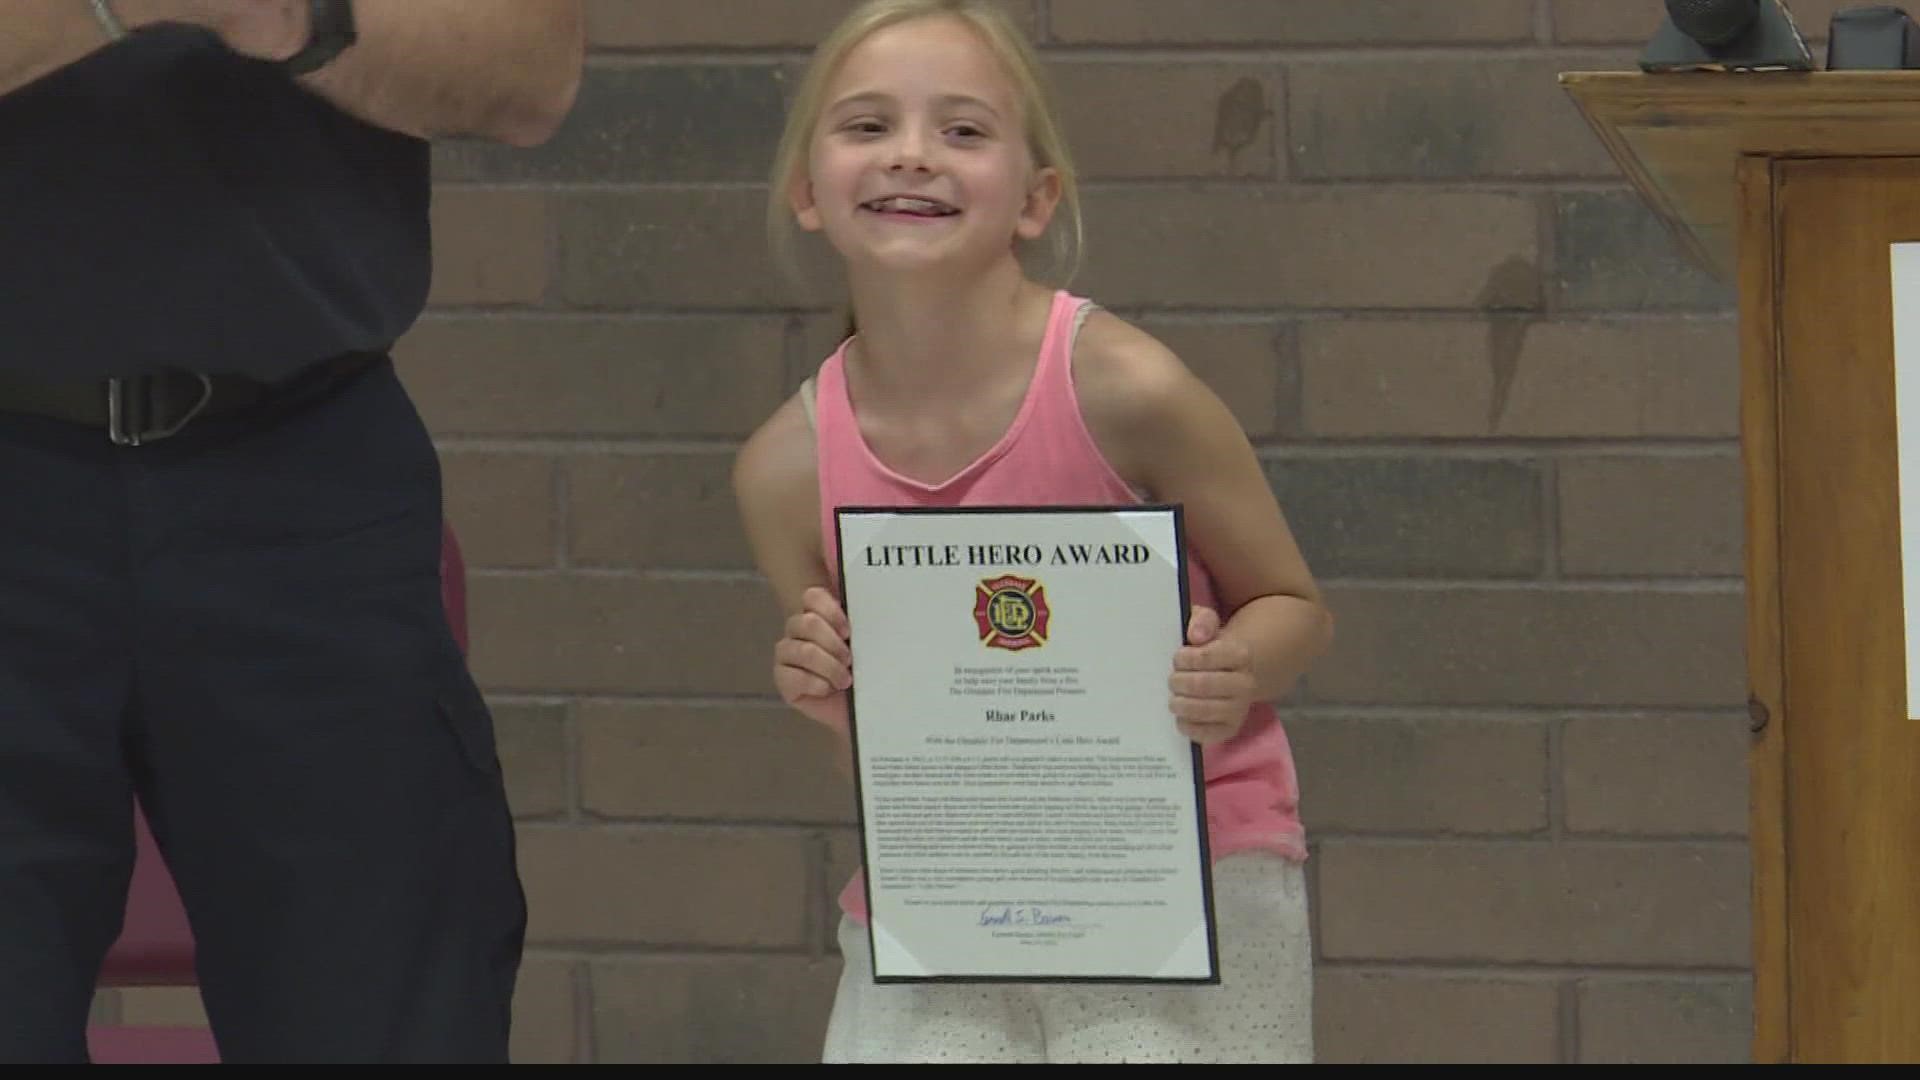 9-year-old Rhae Parks was honored with the Little Hero Award by the Glendale Fire Department for her bravery. She saved her little brother from a house fire.